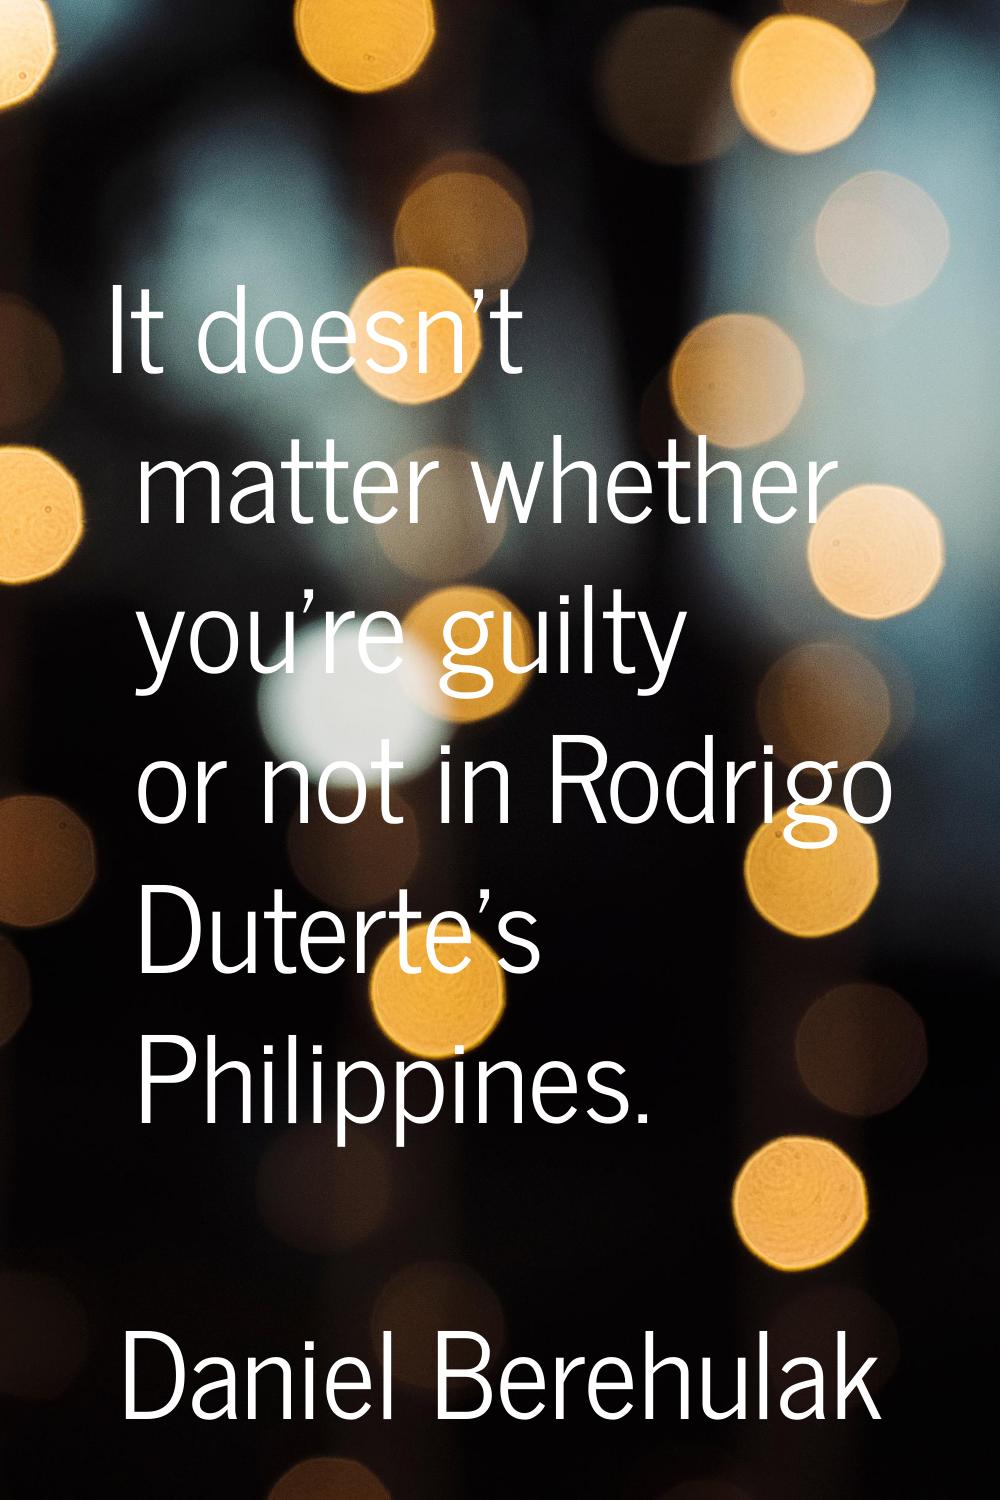 It doesn't matter whether you're guilty or not in Rodrigo Duterte's Philippines.